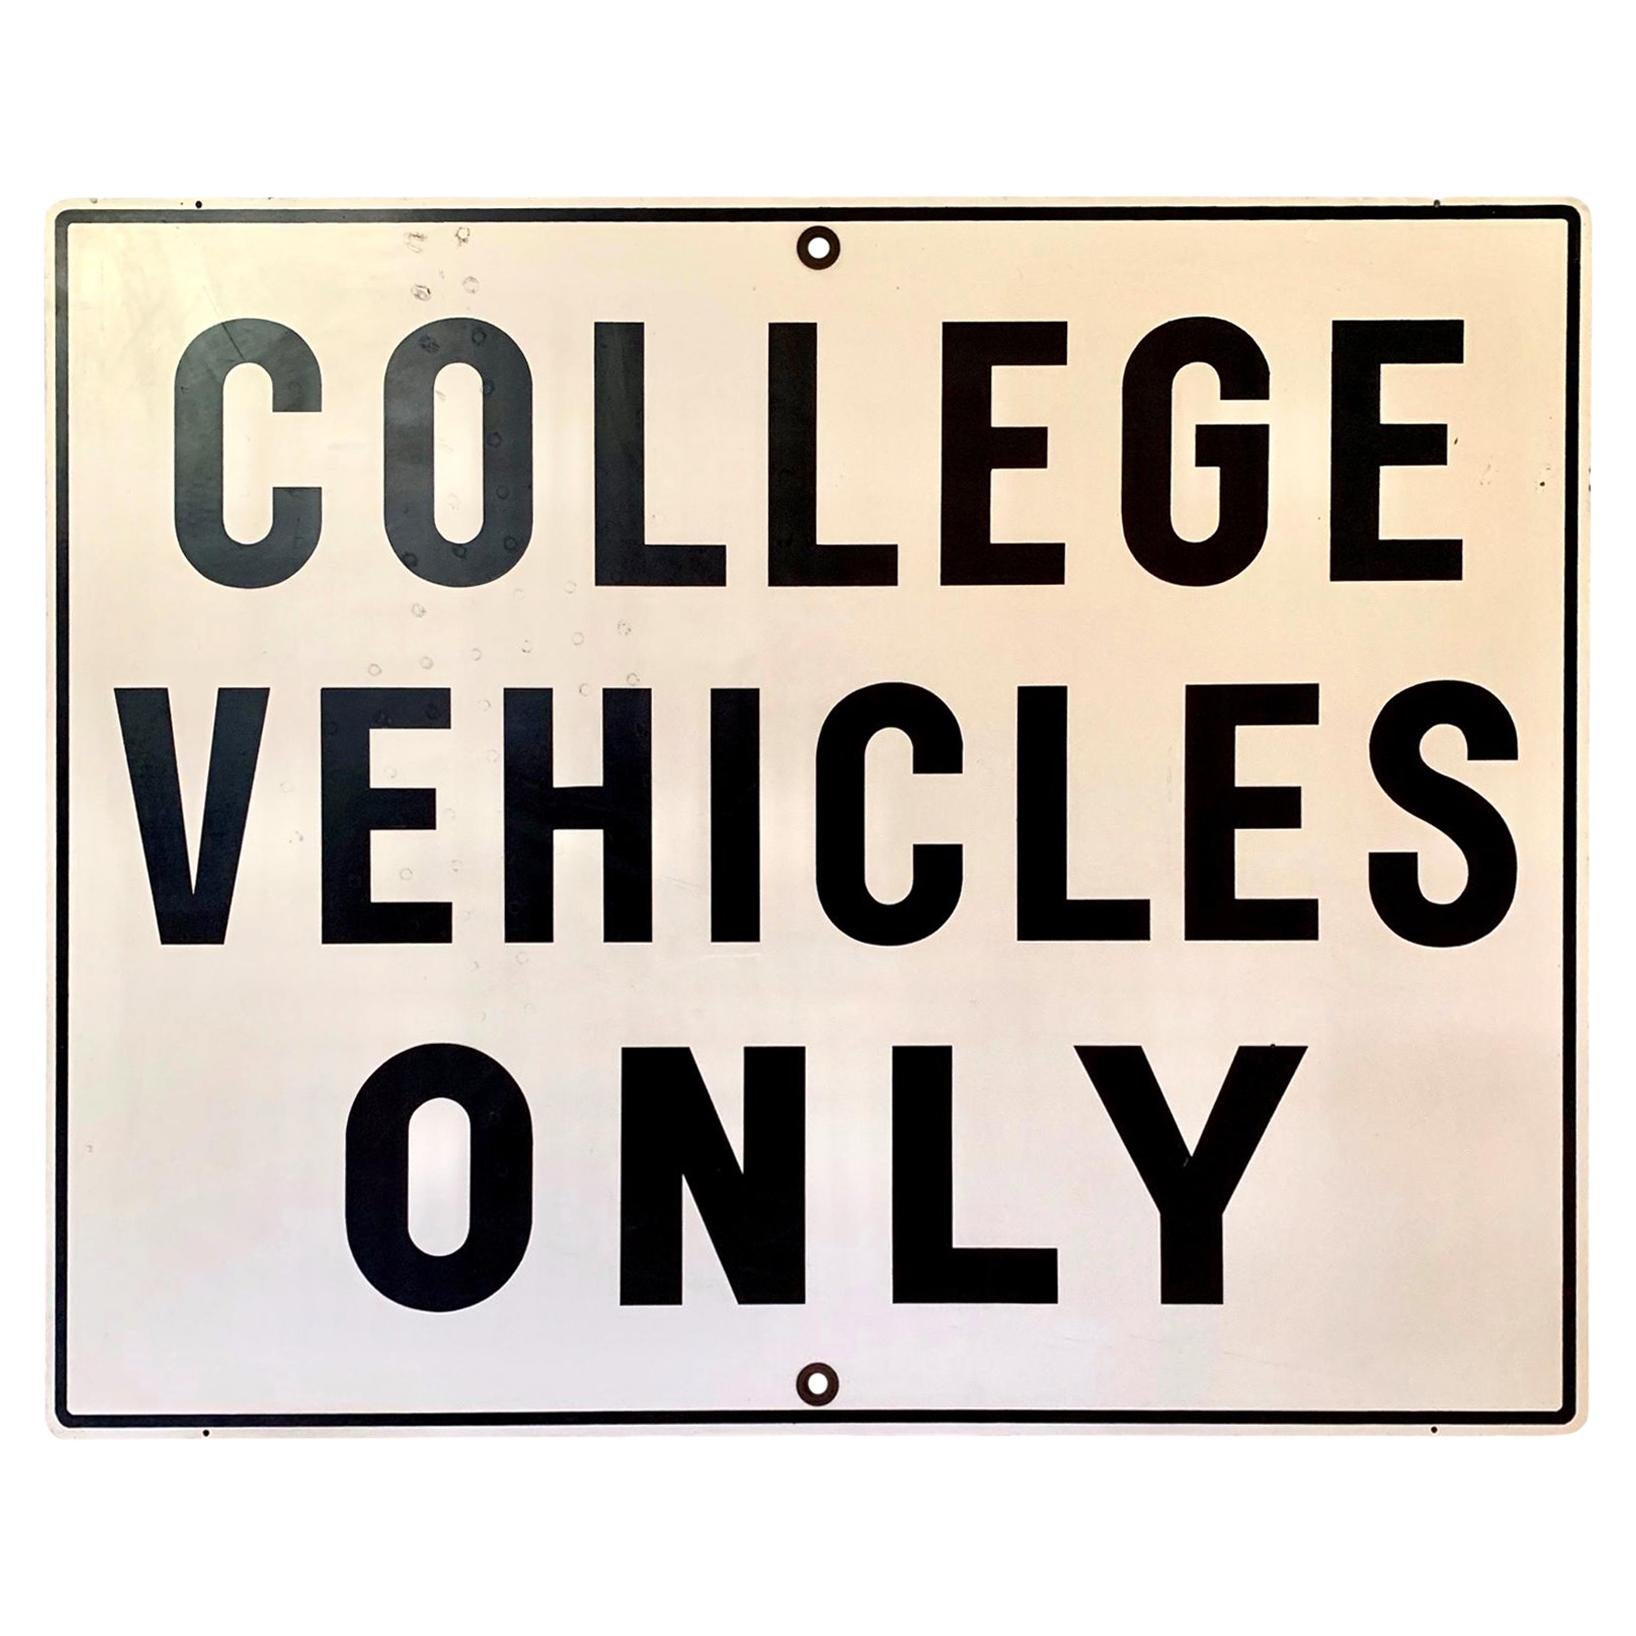 Vintage COLLEGE VEHICLES ONLY Sign